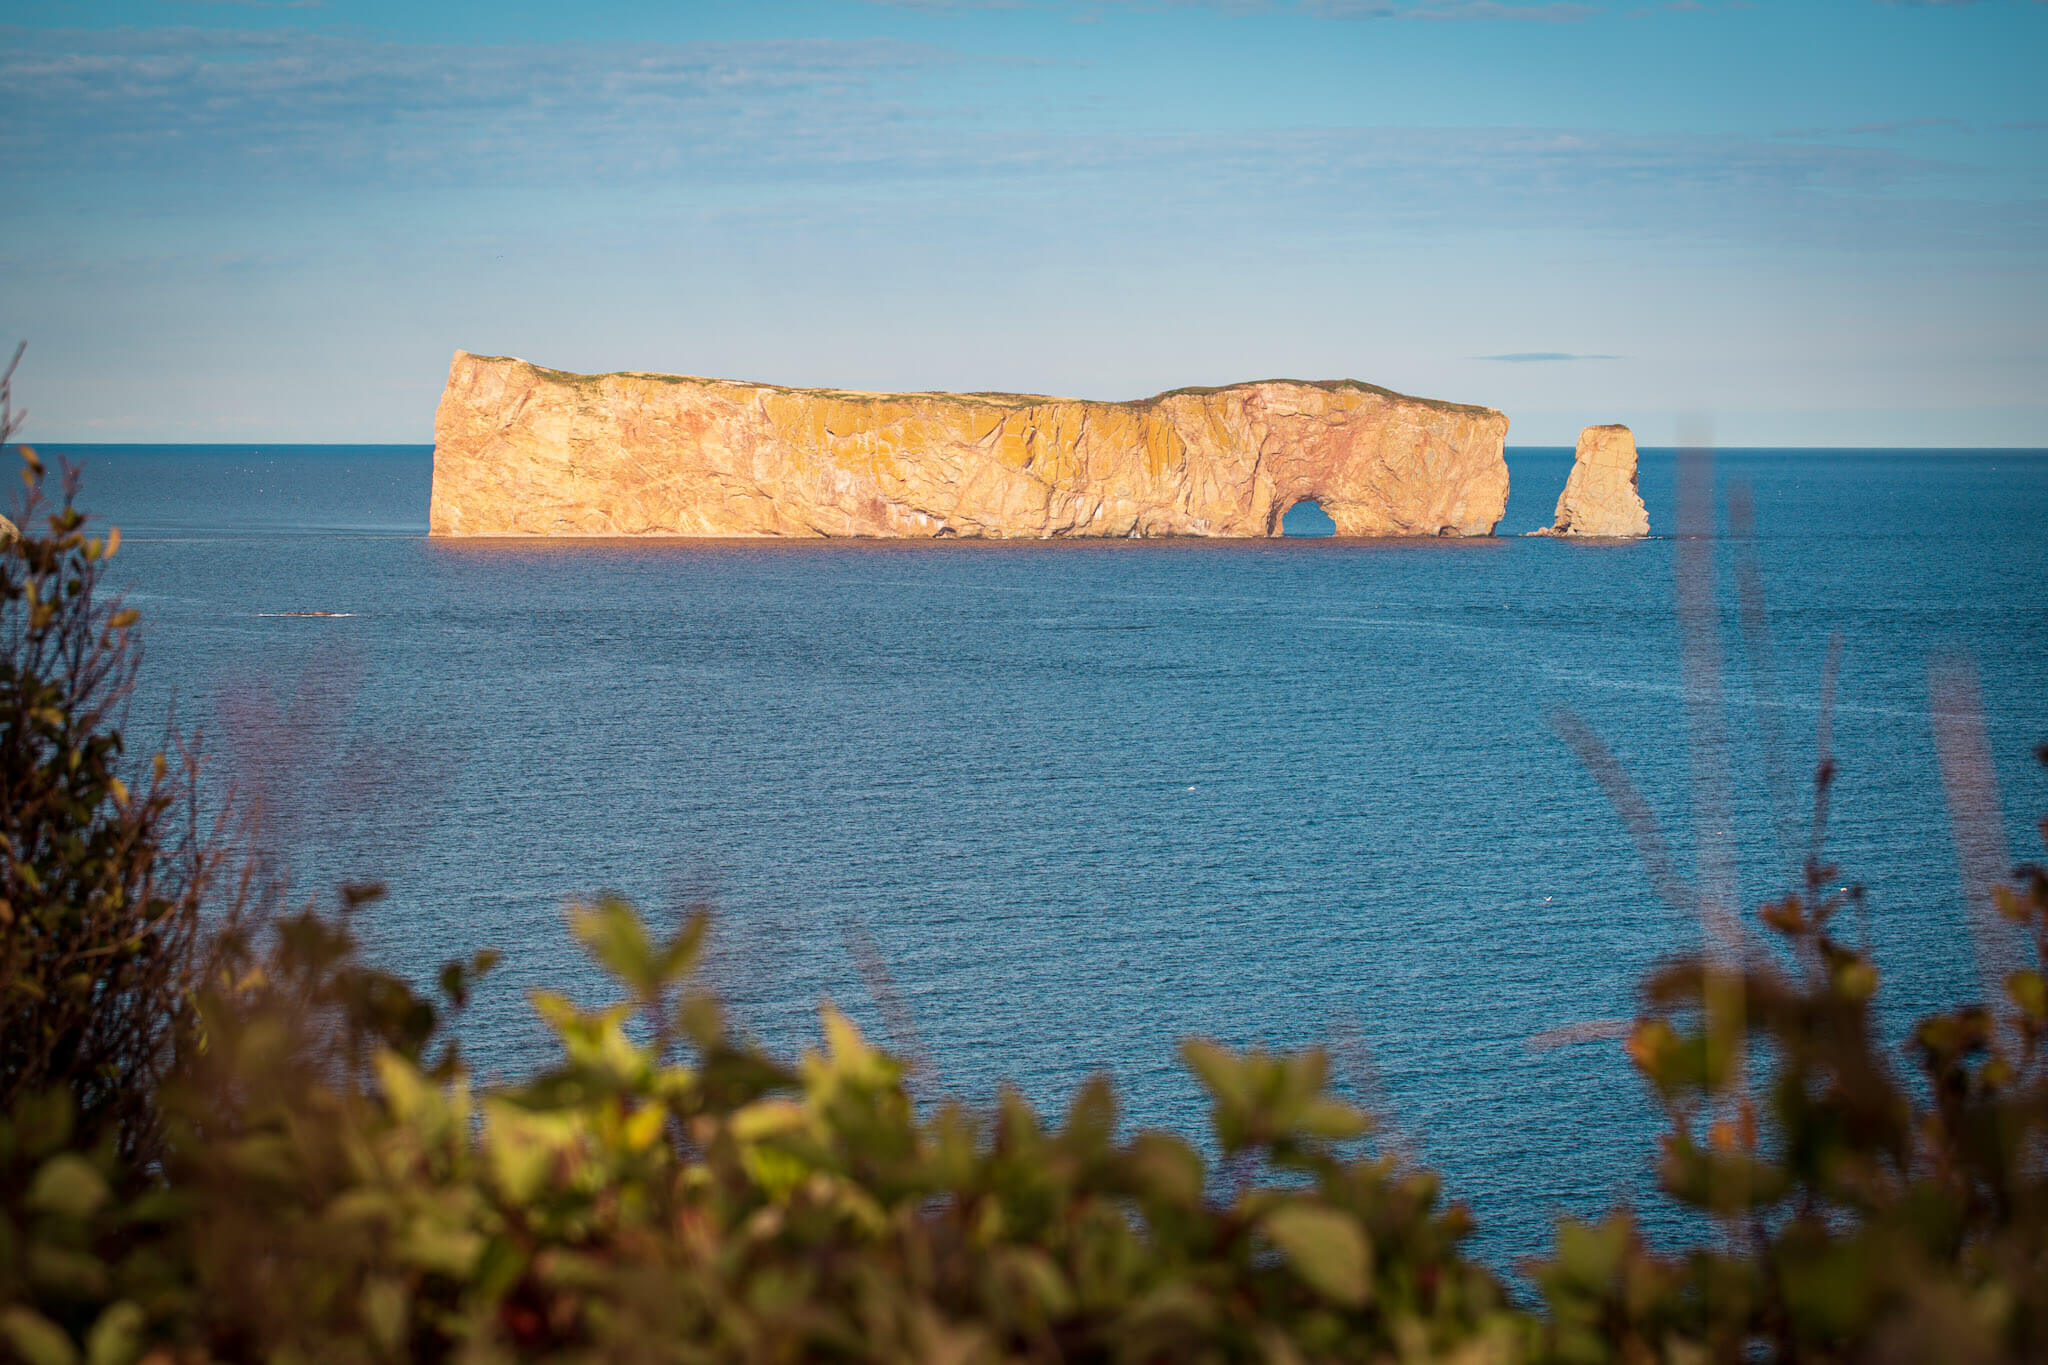 Percé Rock in the Gulf of St. Lawrence off Percé, Québec